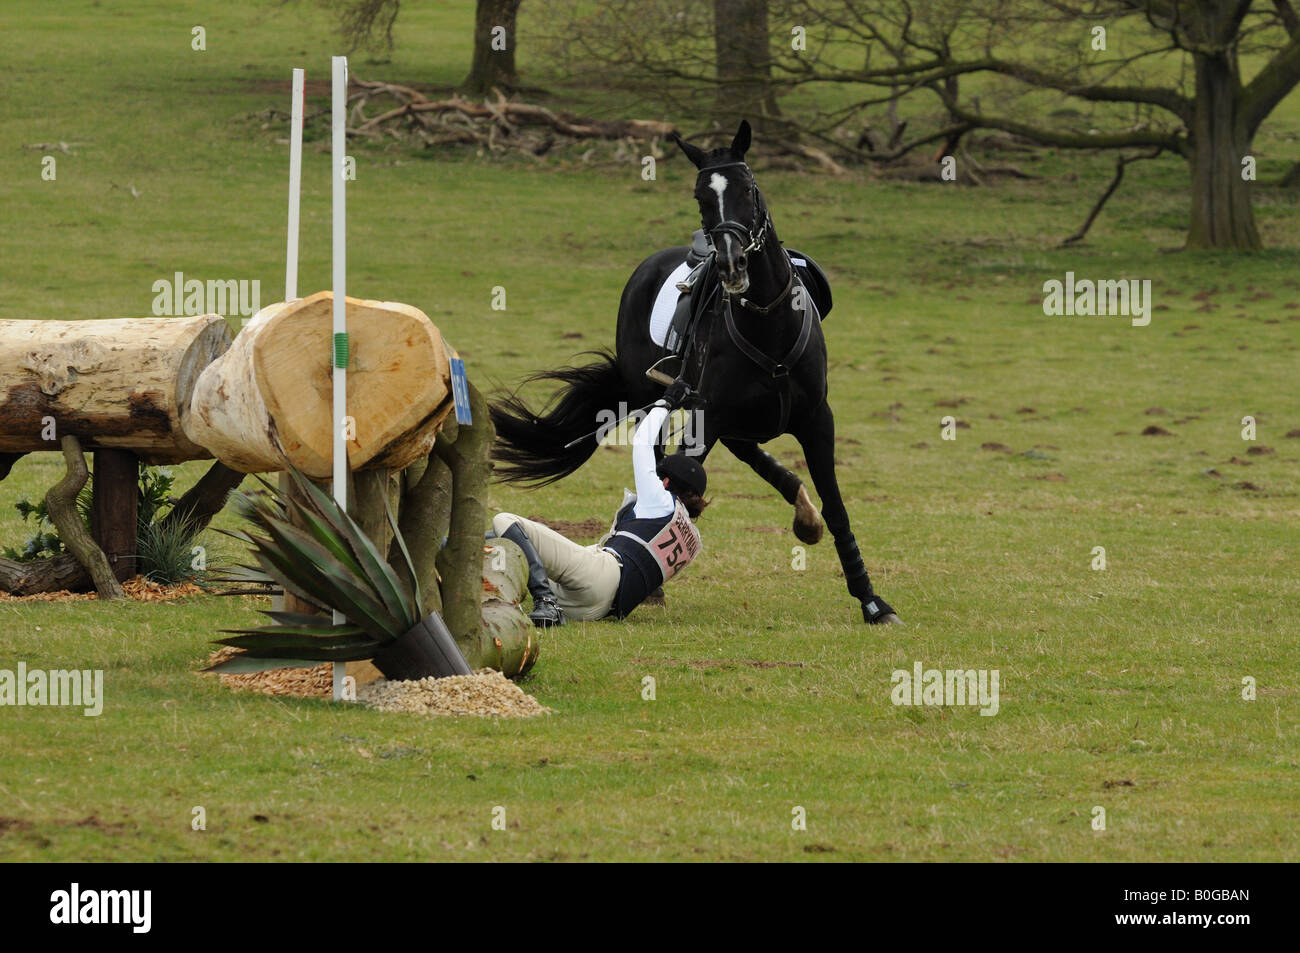 female rider falls from horse rearing up at belton house horse trials in grantham lincolnshire Stock Photo